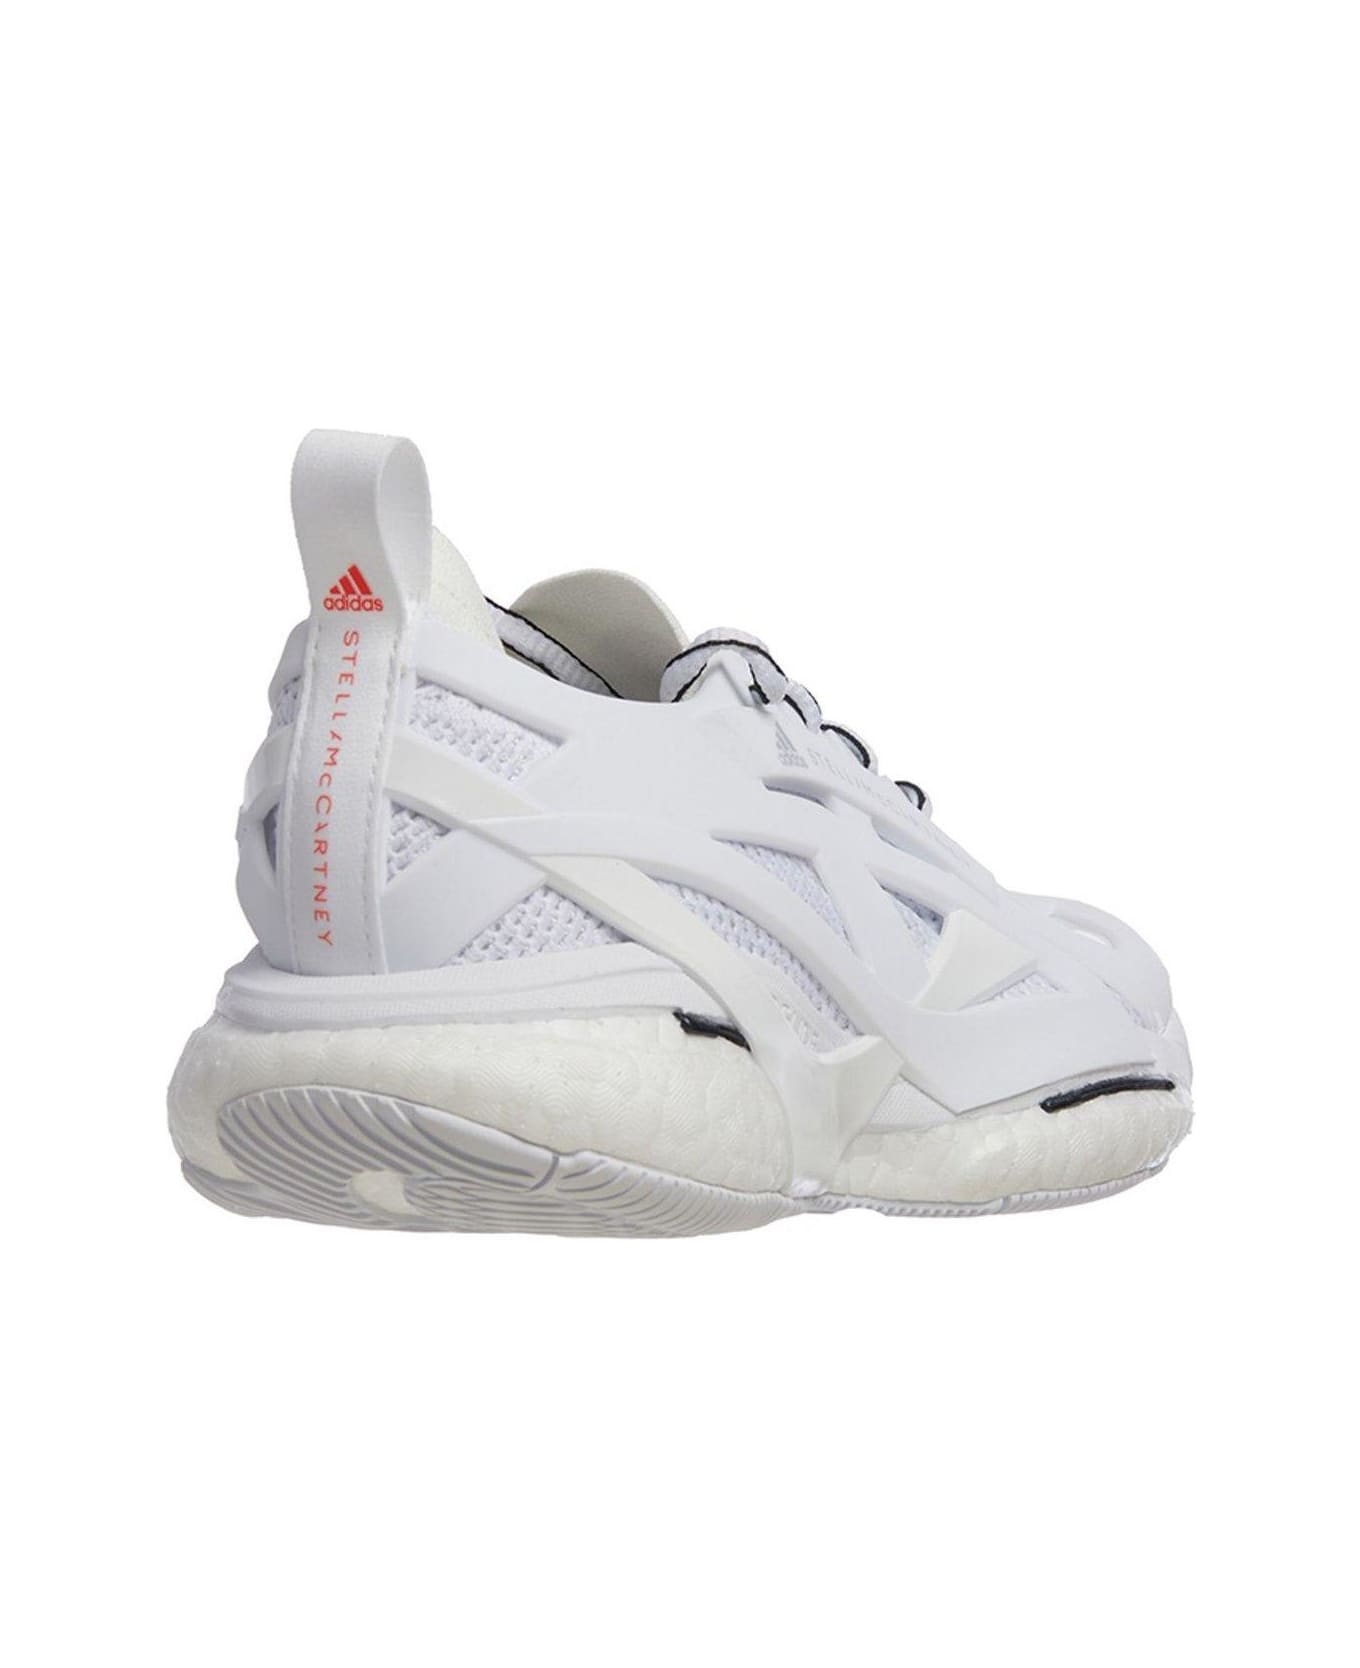 Adidas by Stella McCartney Solarglide Sneakers - WHITE